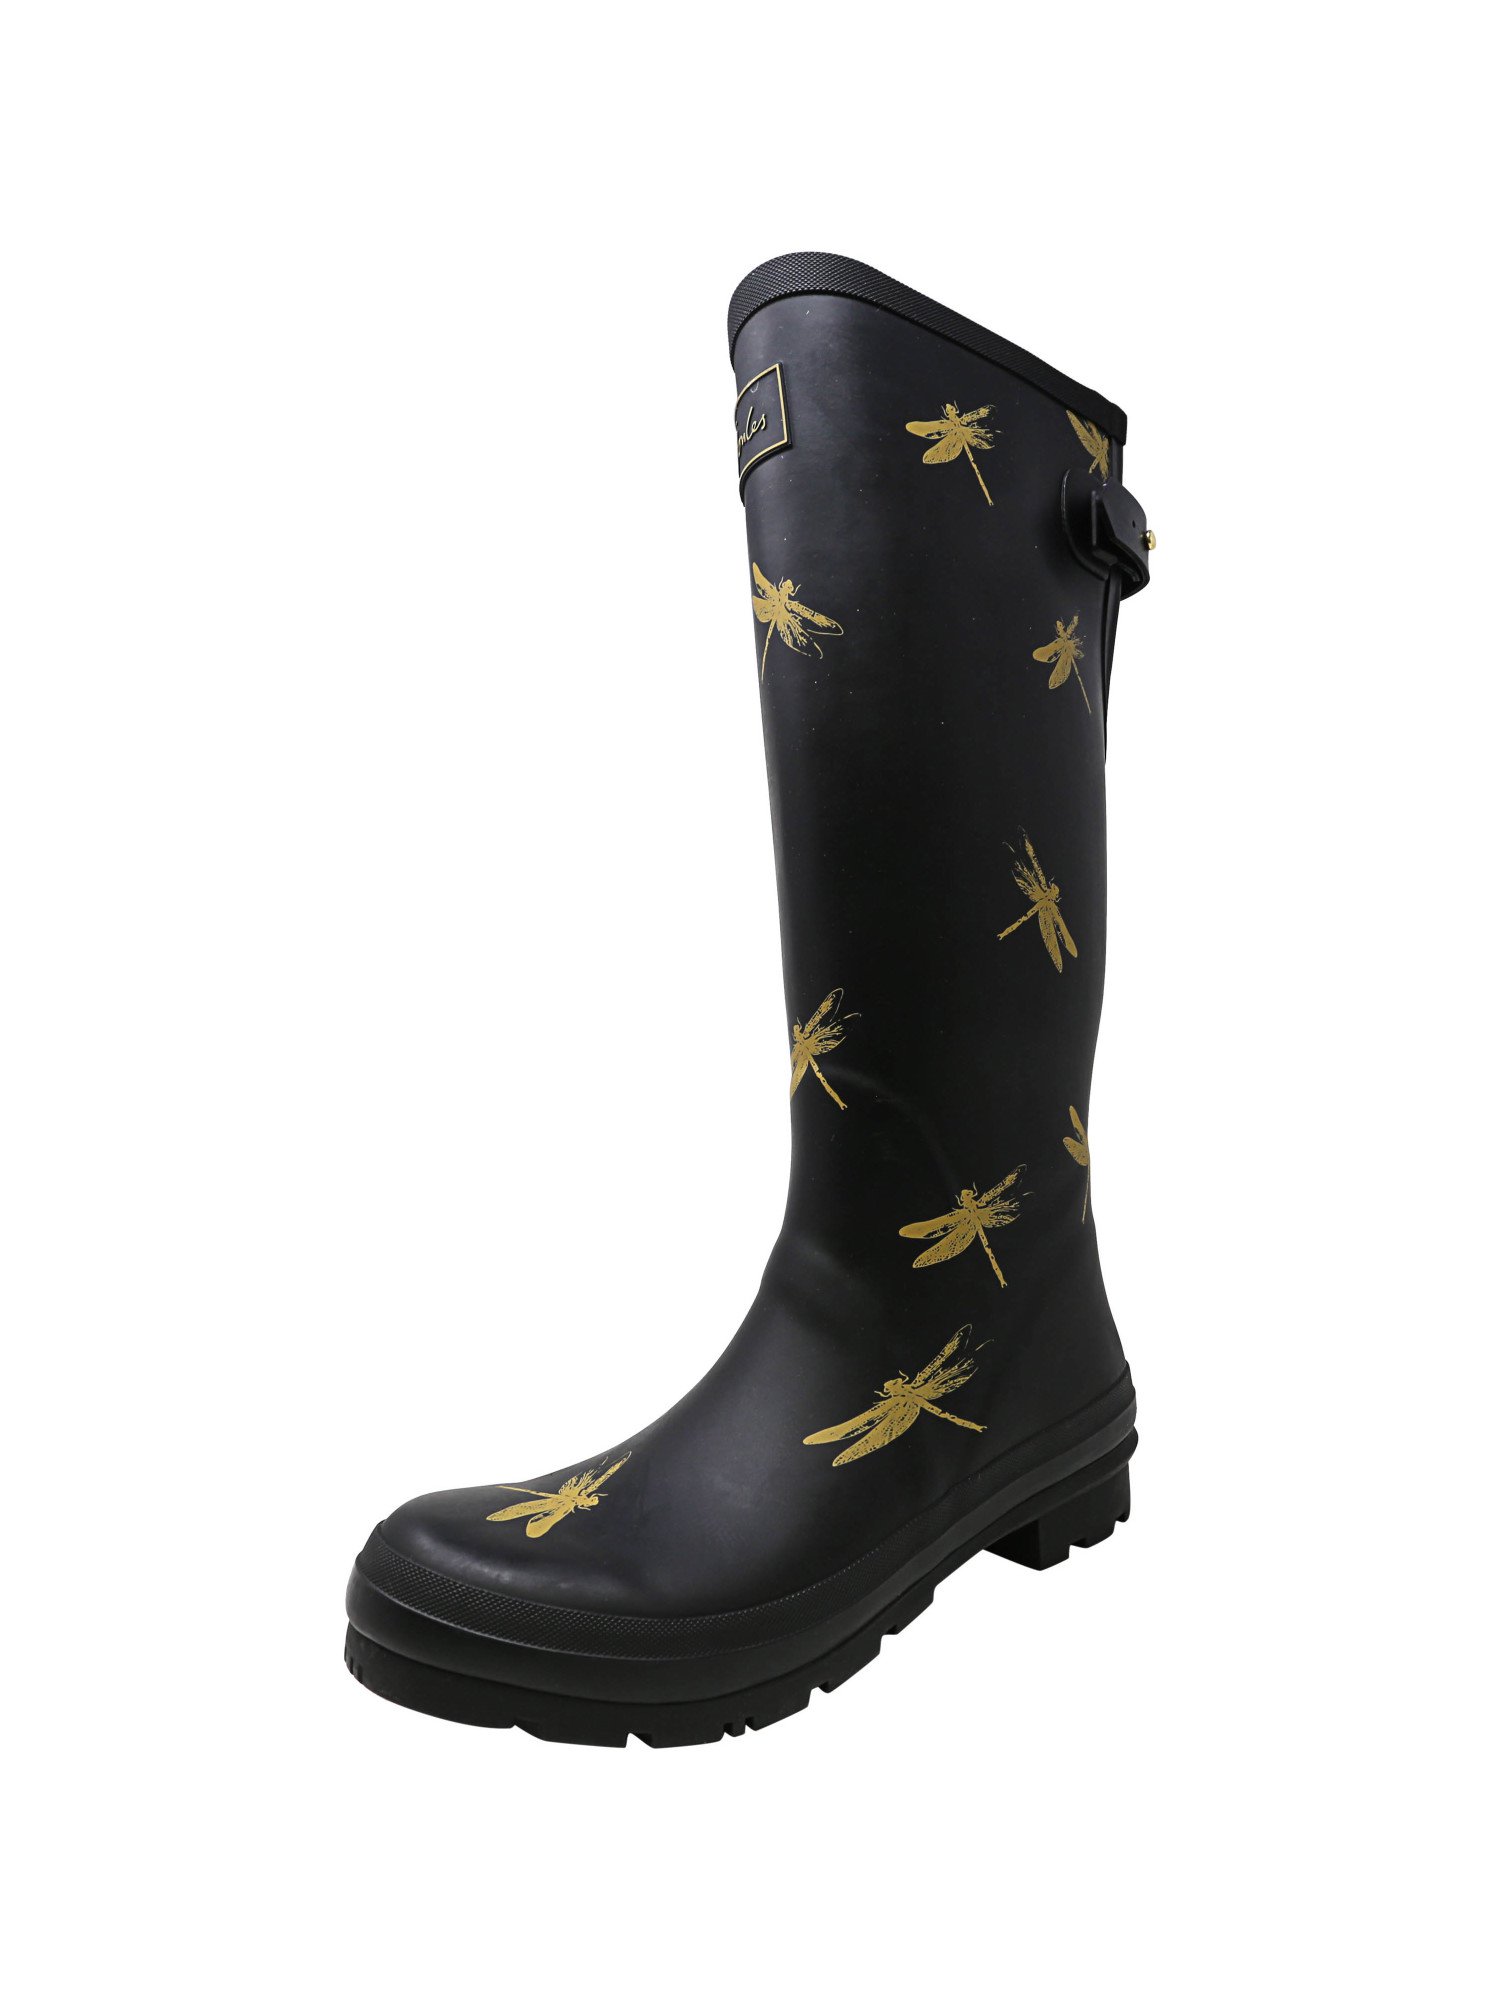 Green Details about  / Joules Men/'s Field Welly Neoprene-Lined Rain Boot  12